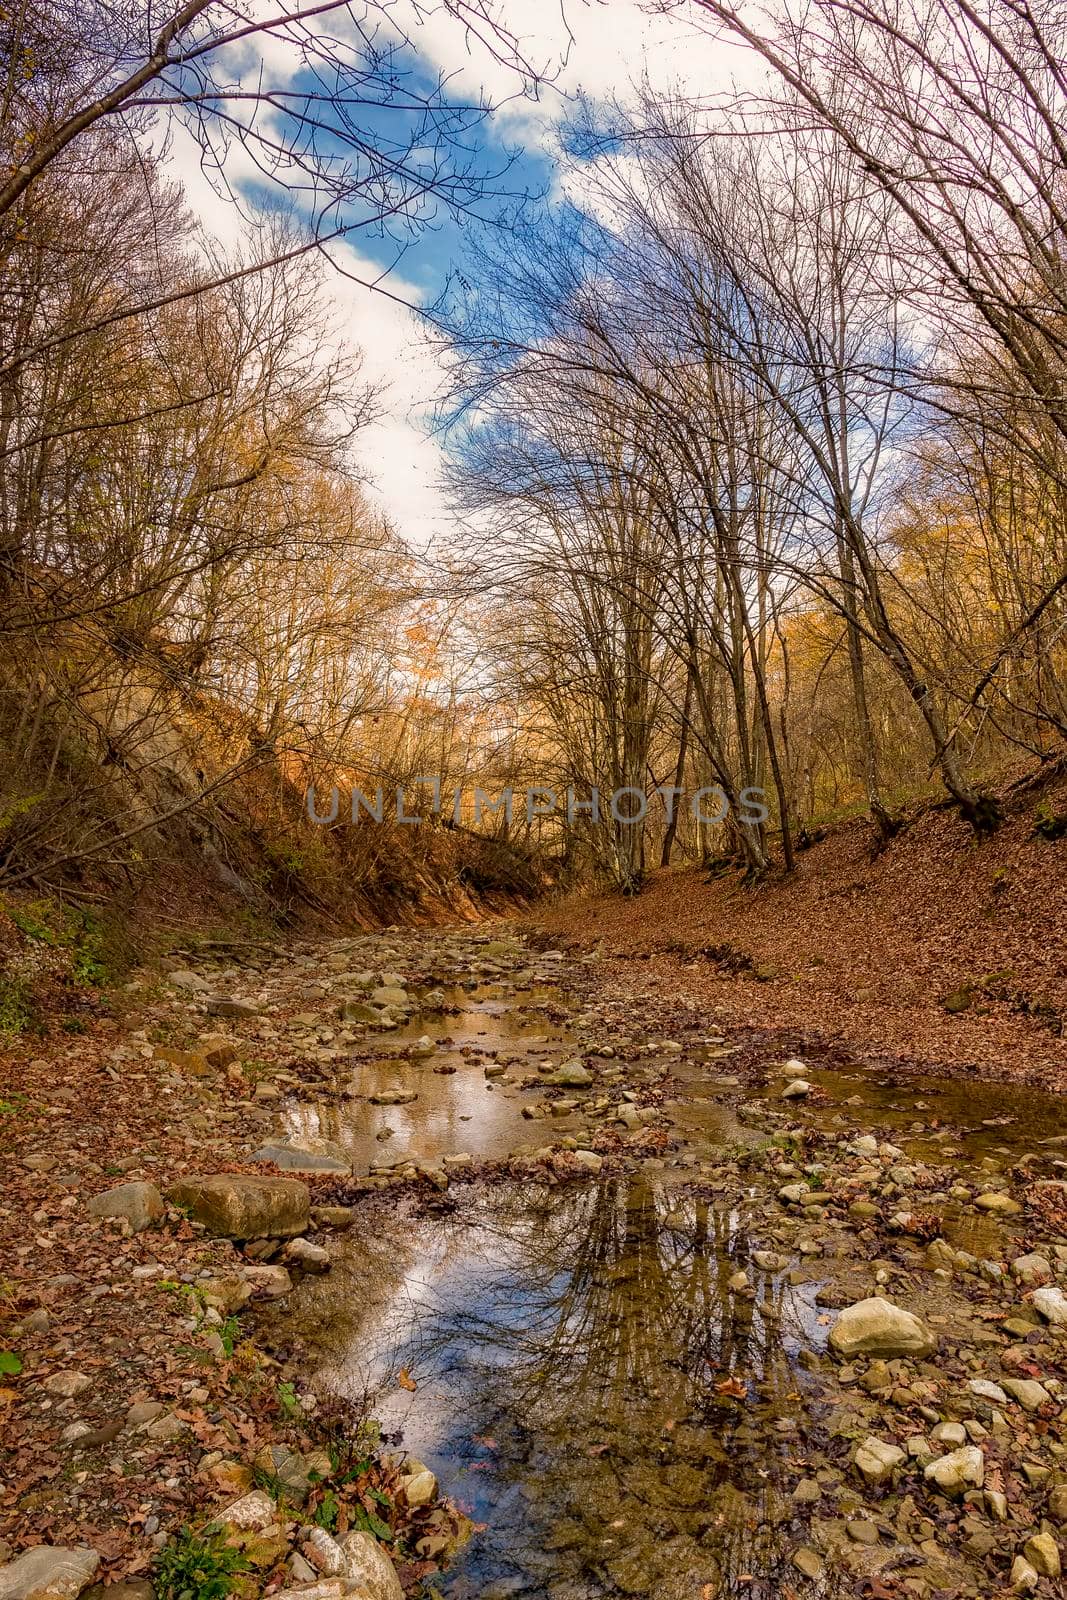 Autumn nature view. Autumn colored landscape view of the autumn forest and small river